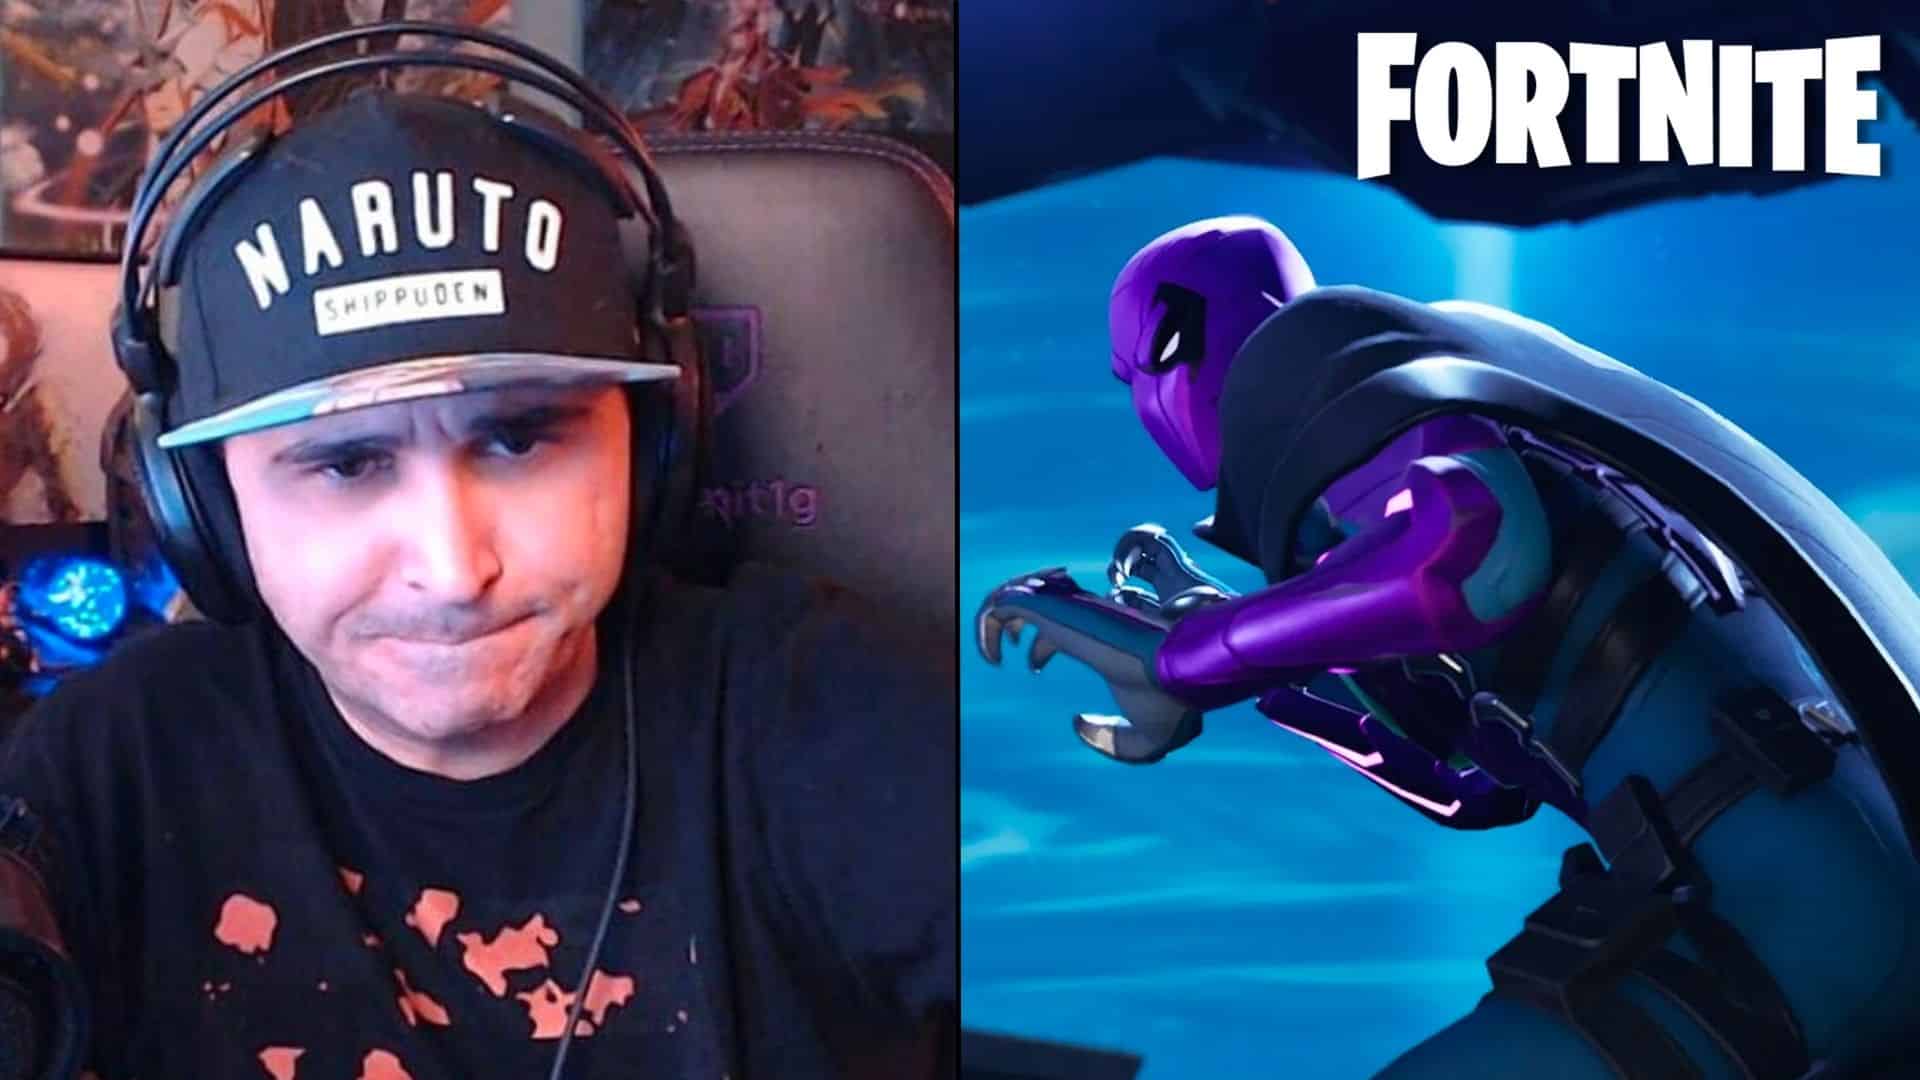 Summit1g side-by-side with purple Fortnite character